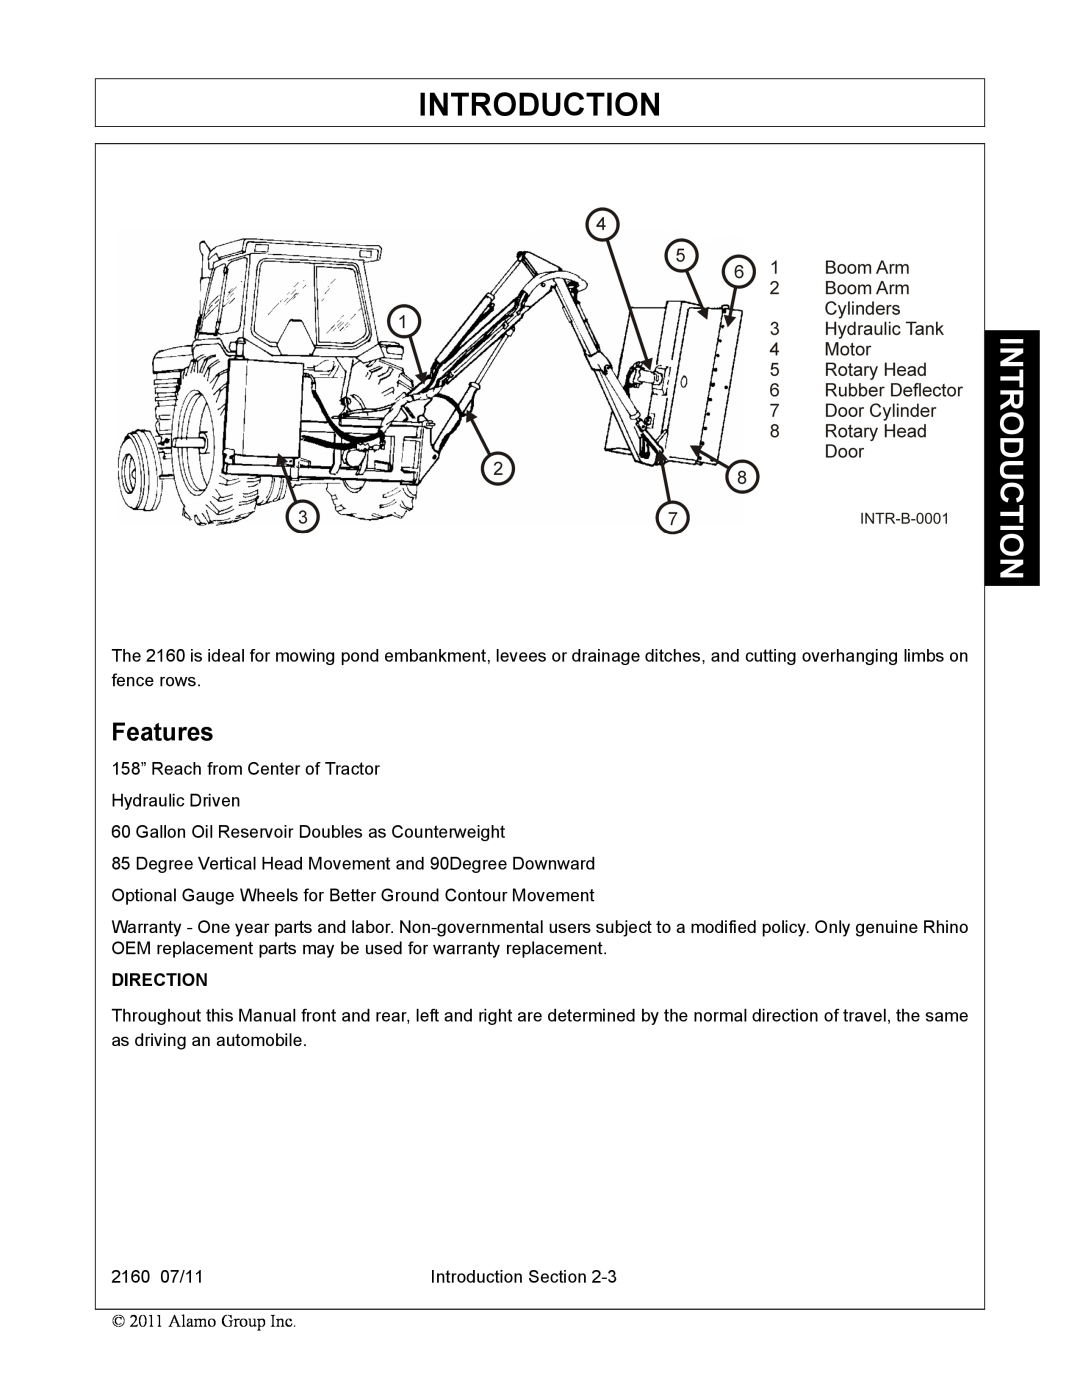 Servis-Rhino 2160 manual Features, Introduction, Direction 